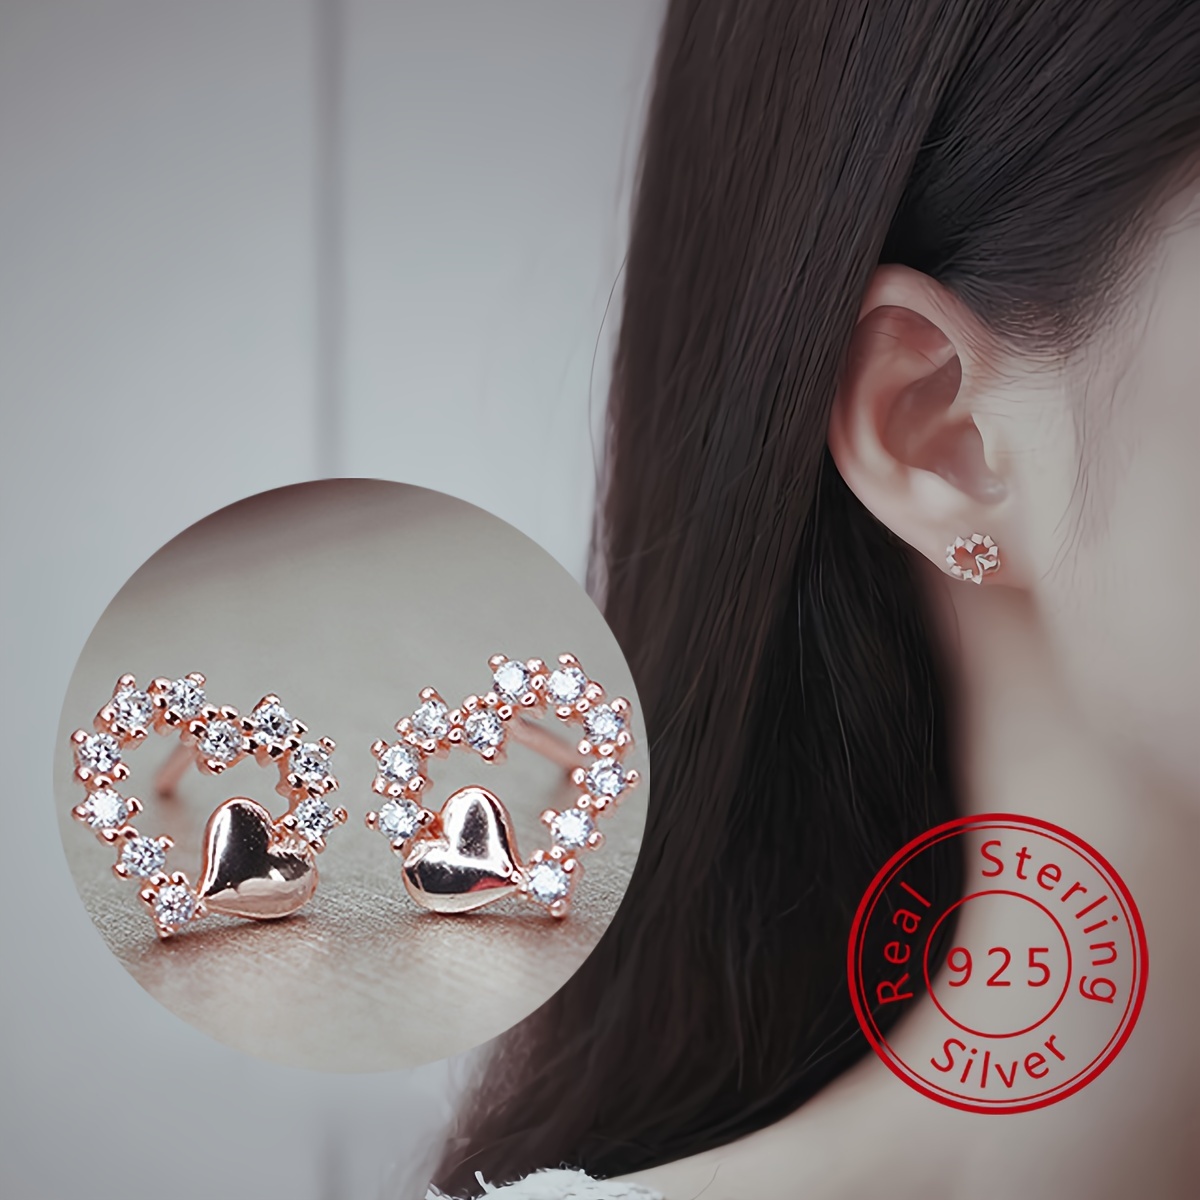 

1g A Pair Of S925 Silver Plated 14k Rose Gold, Small And Caring Pure Silver Earrings For Women, Simple And Cool Style, Versatile Earrings For Women's Birthdays And Valentine's Day Jewelry